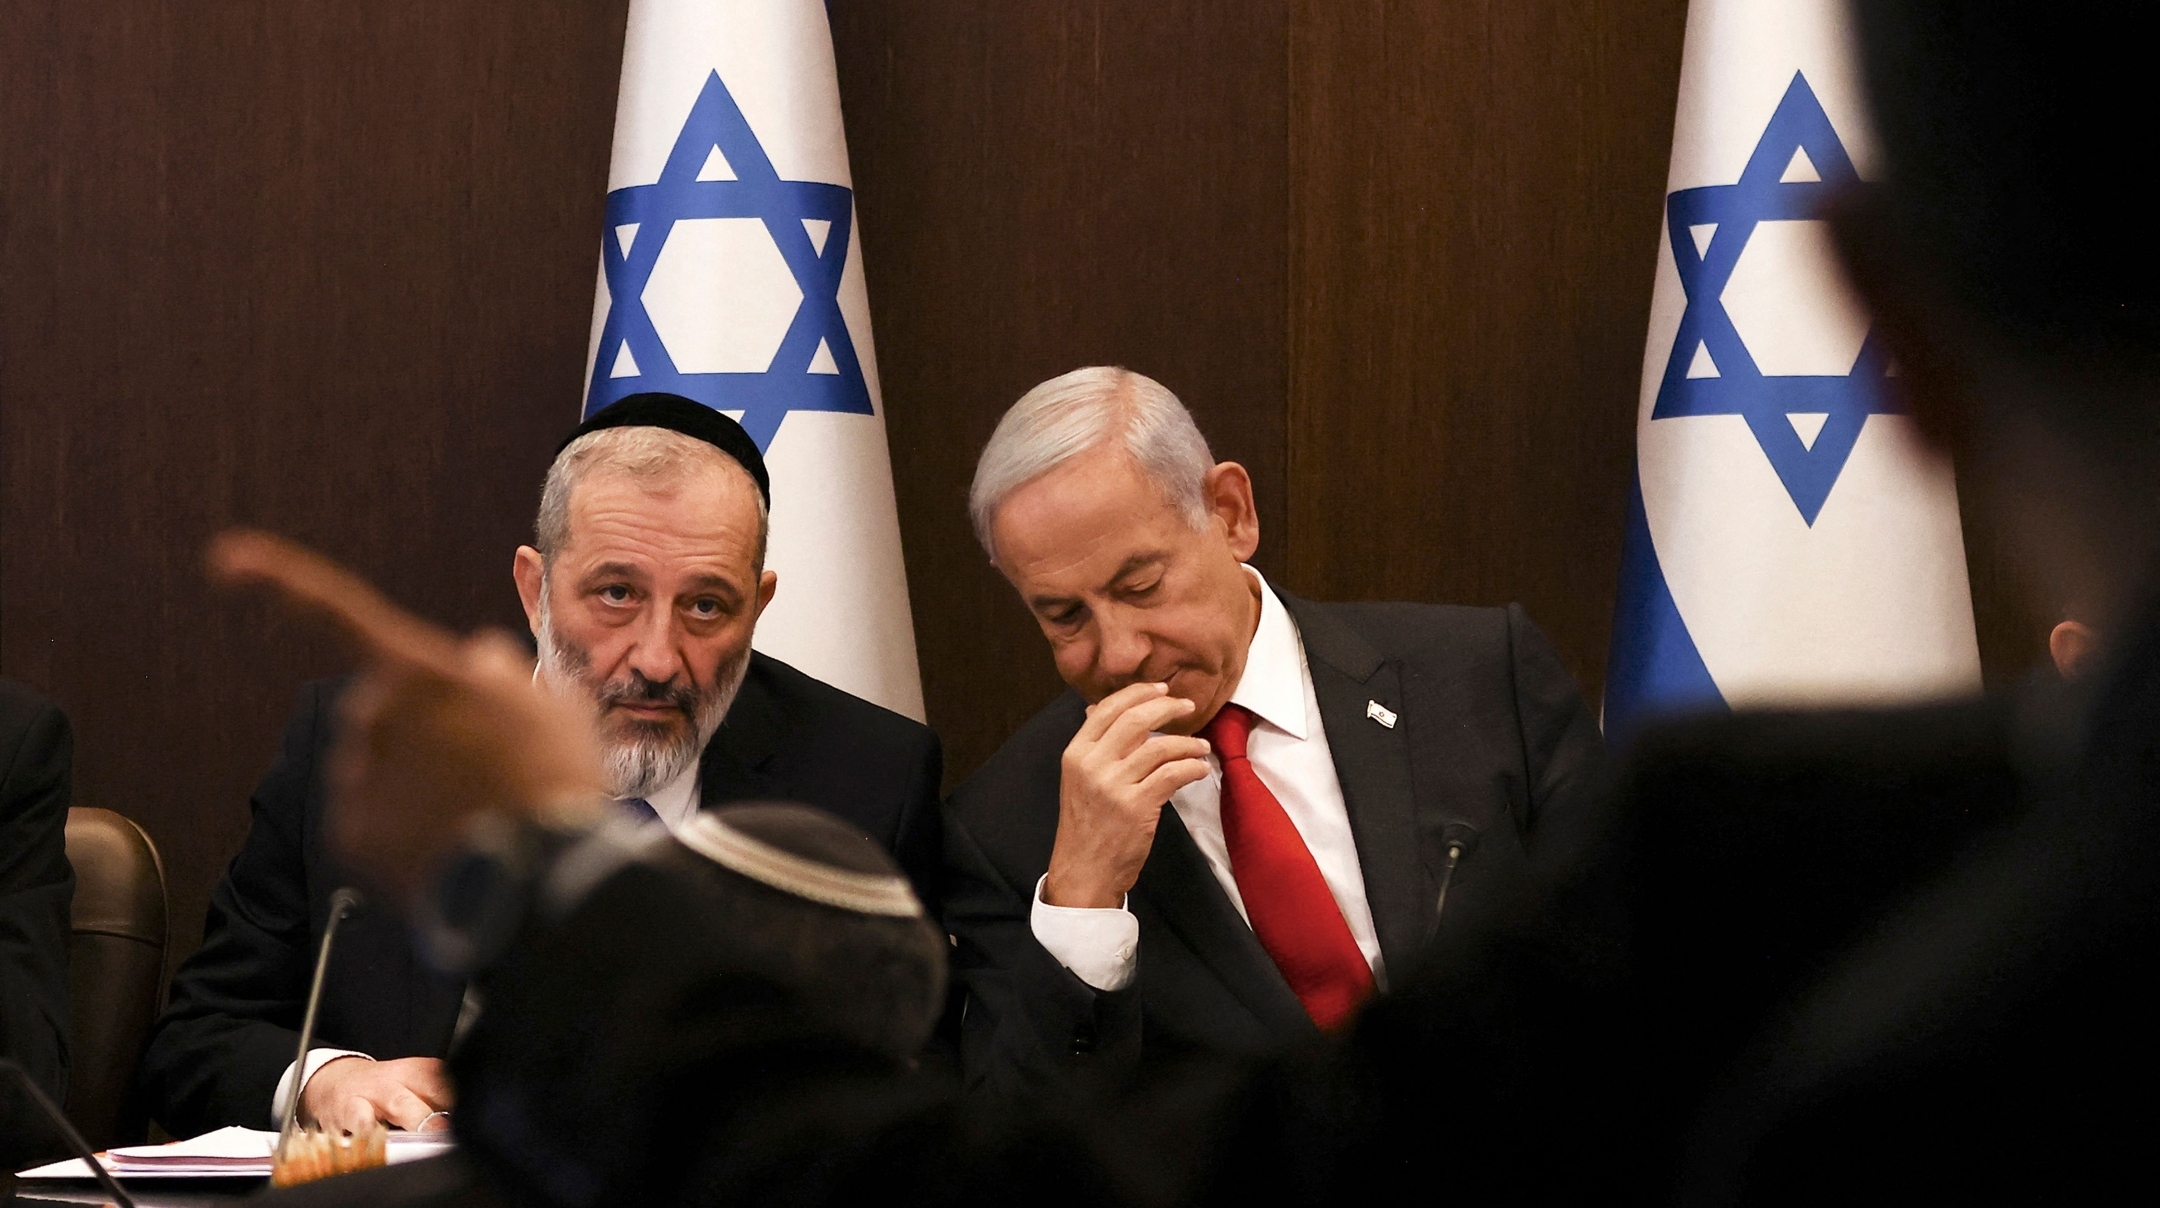 Israel’s Prime Minister Benjamin Netanyahu, right, sits next to Interior and Health Minister Aryeh Deri during a weekly Cabinet meeting at the prime minister’s office in Jerusalem, Jan. 8, 2023. (Ronen Zevulun/Pool/AFP via Getty Images)